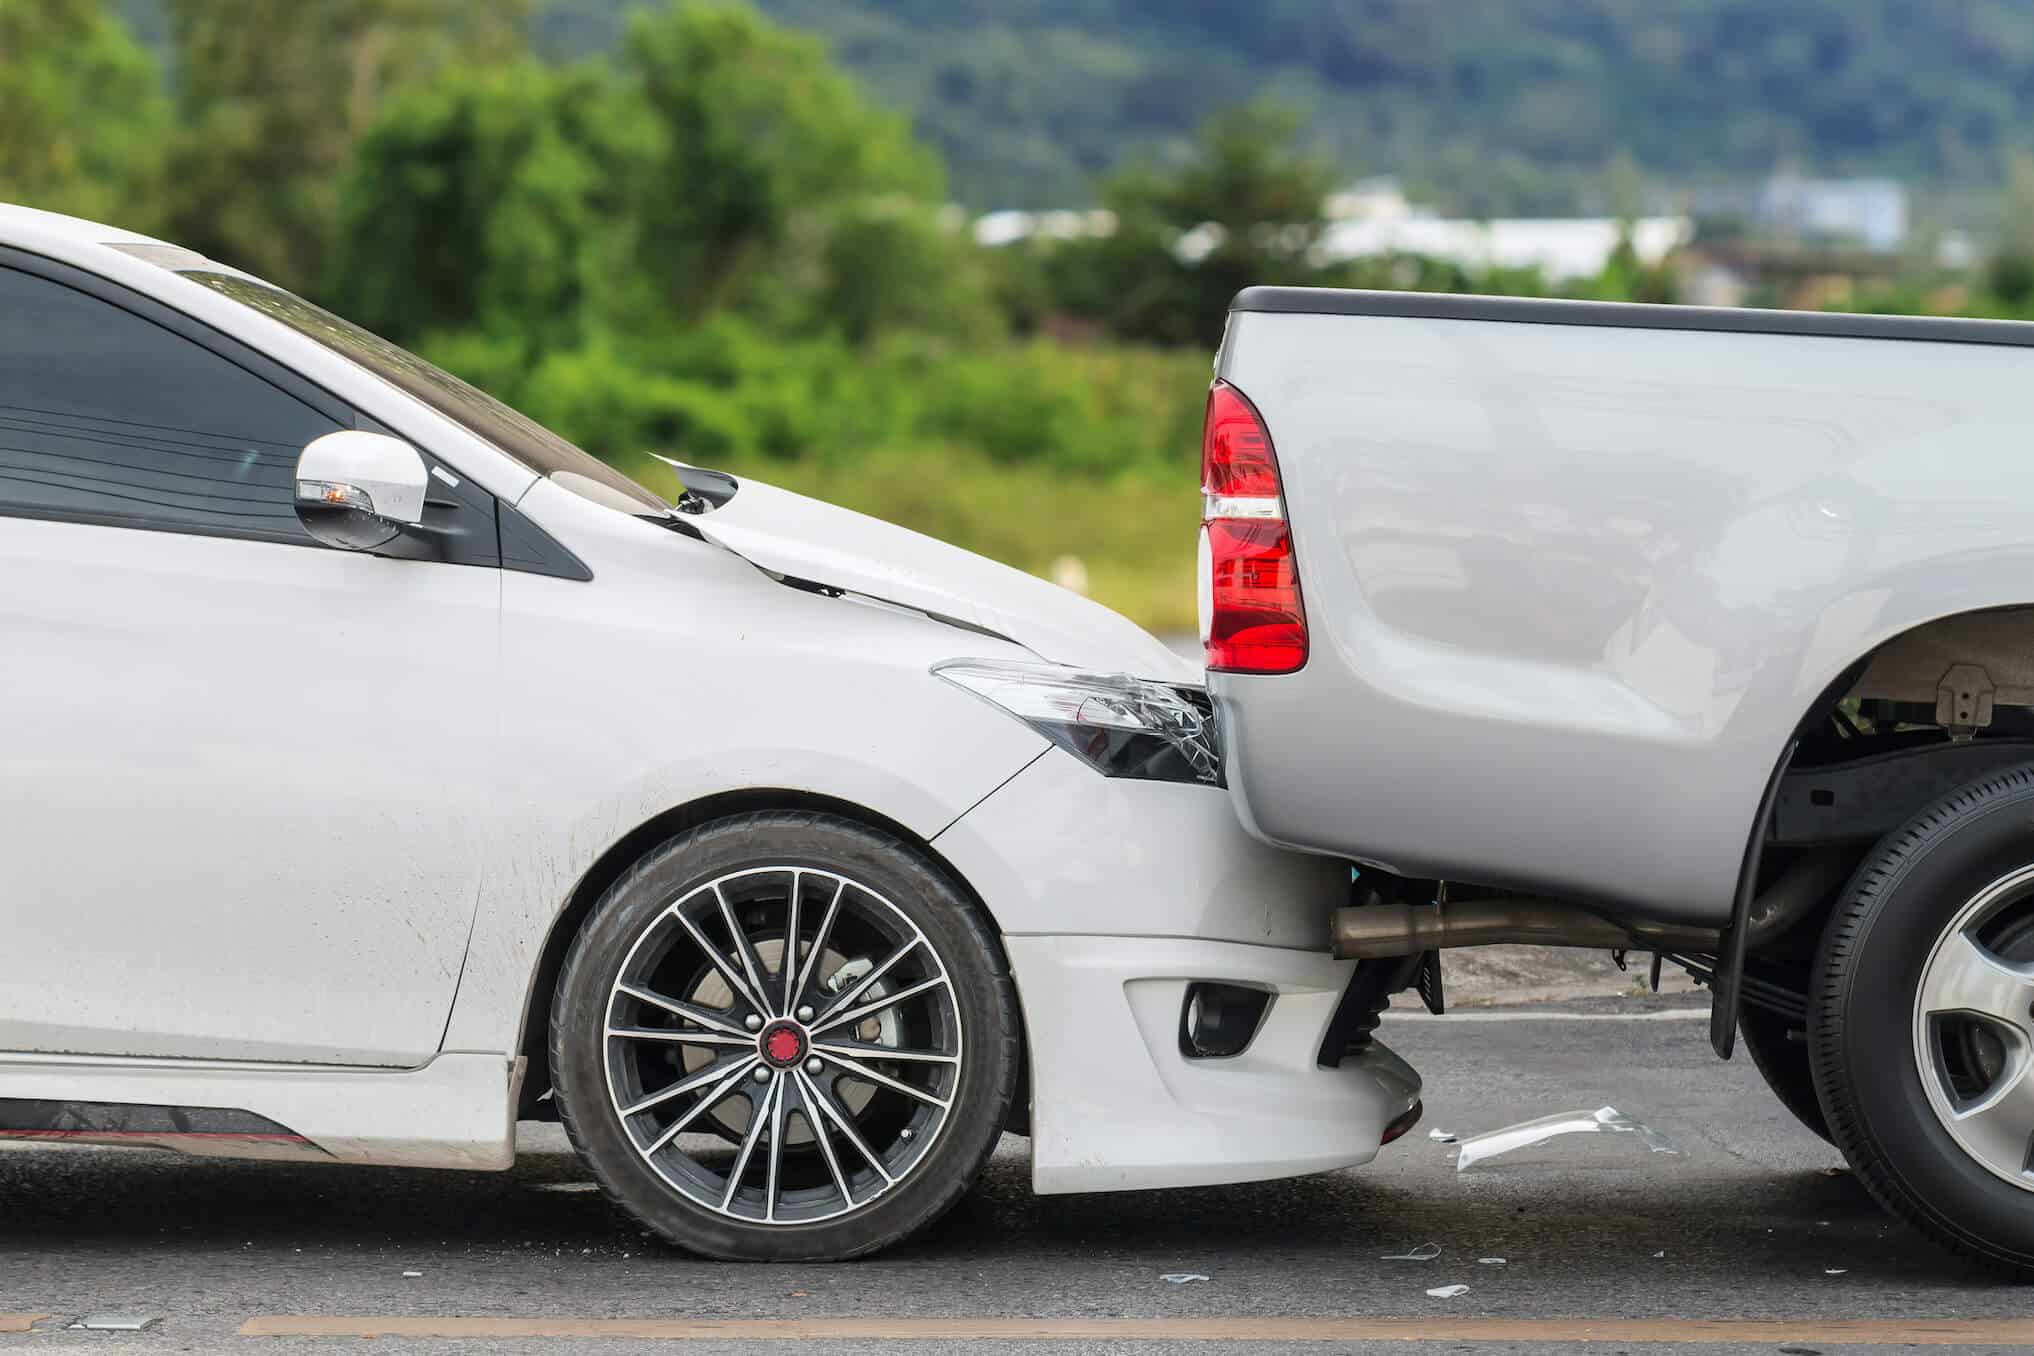 What to Do After Getting Rear-Ended